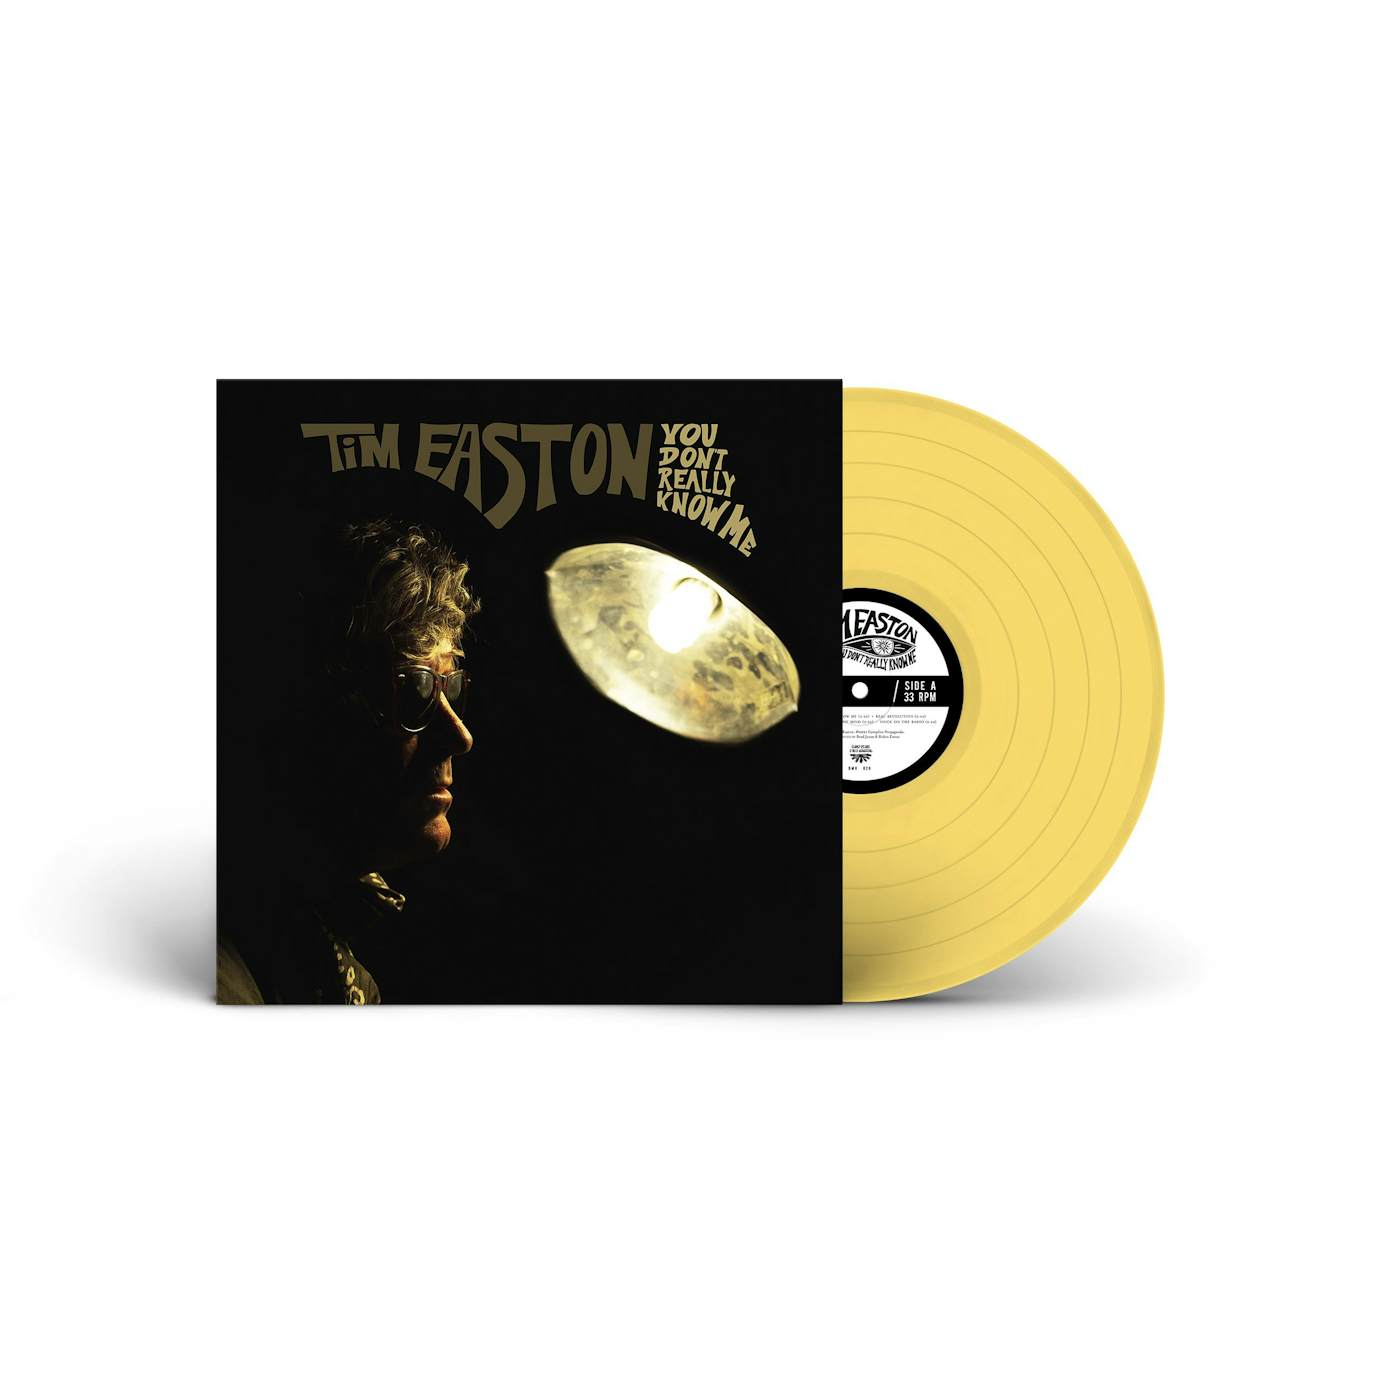 Tim Easton You Don't Really Know Me 12"LP (Mustard vinyl)